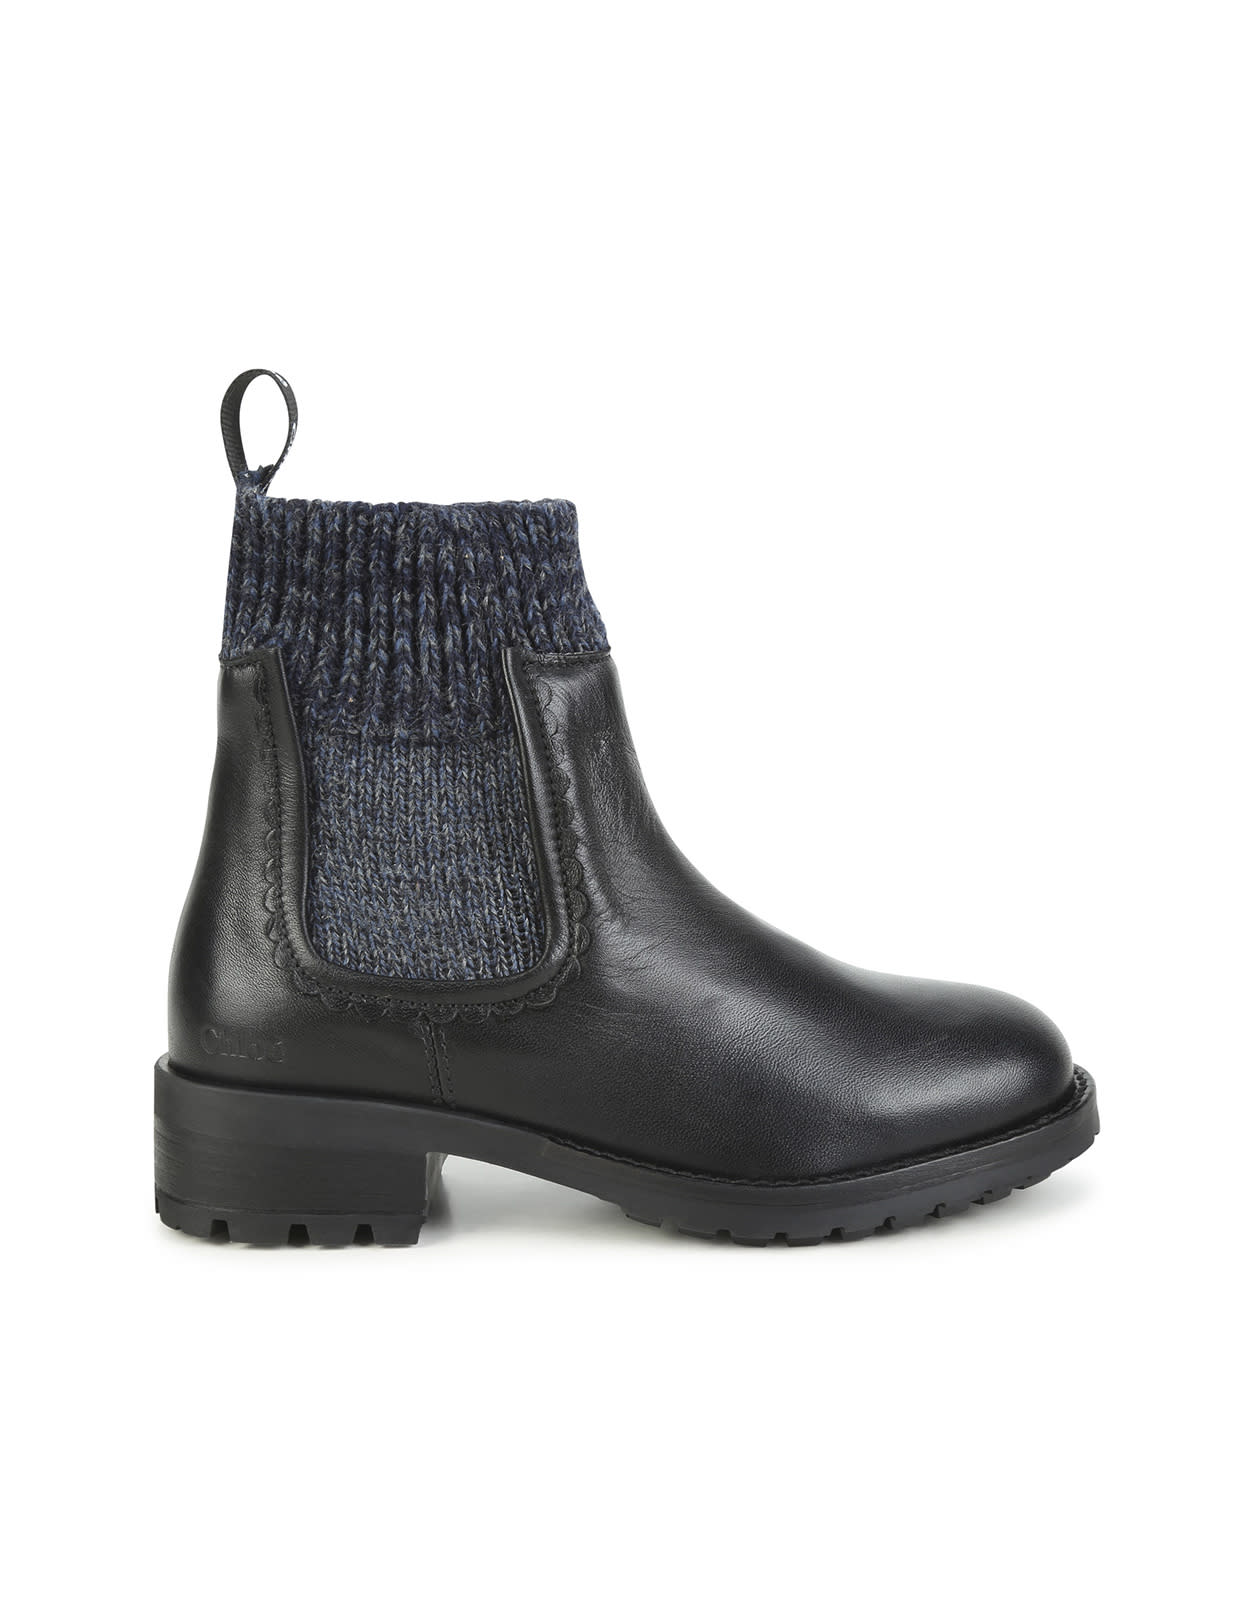 CHLOÉ BLACK LEATHER ANKLE BOOTS WITH NAVY BLUE SOCK INSERT